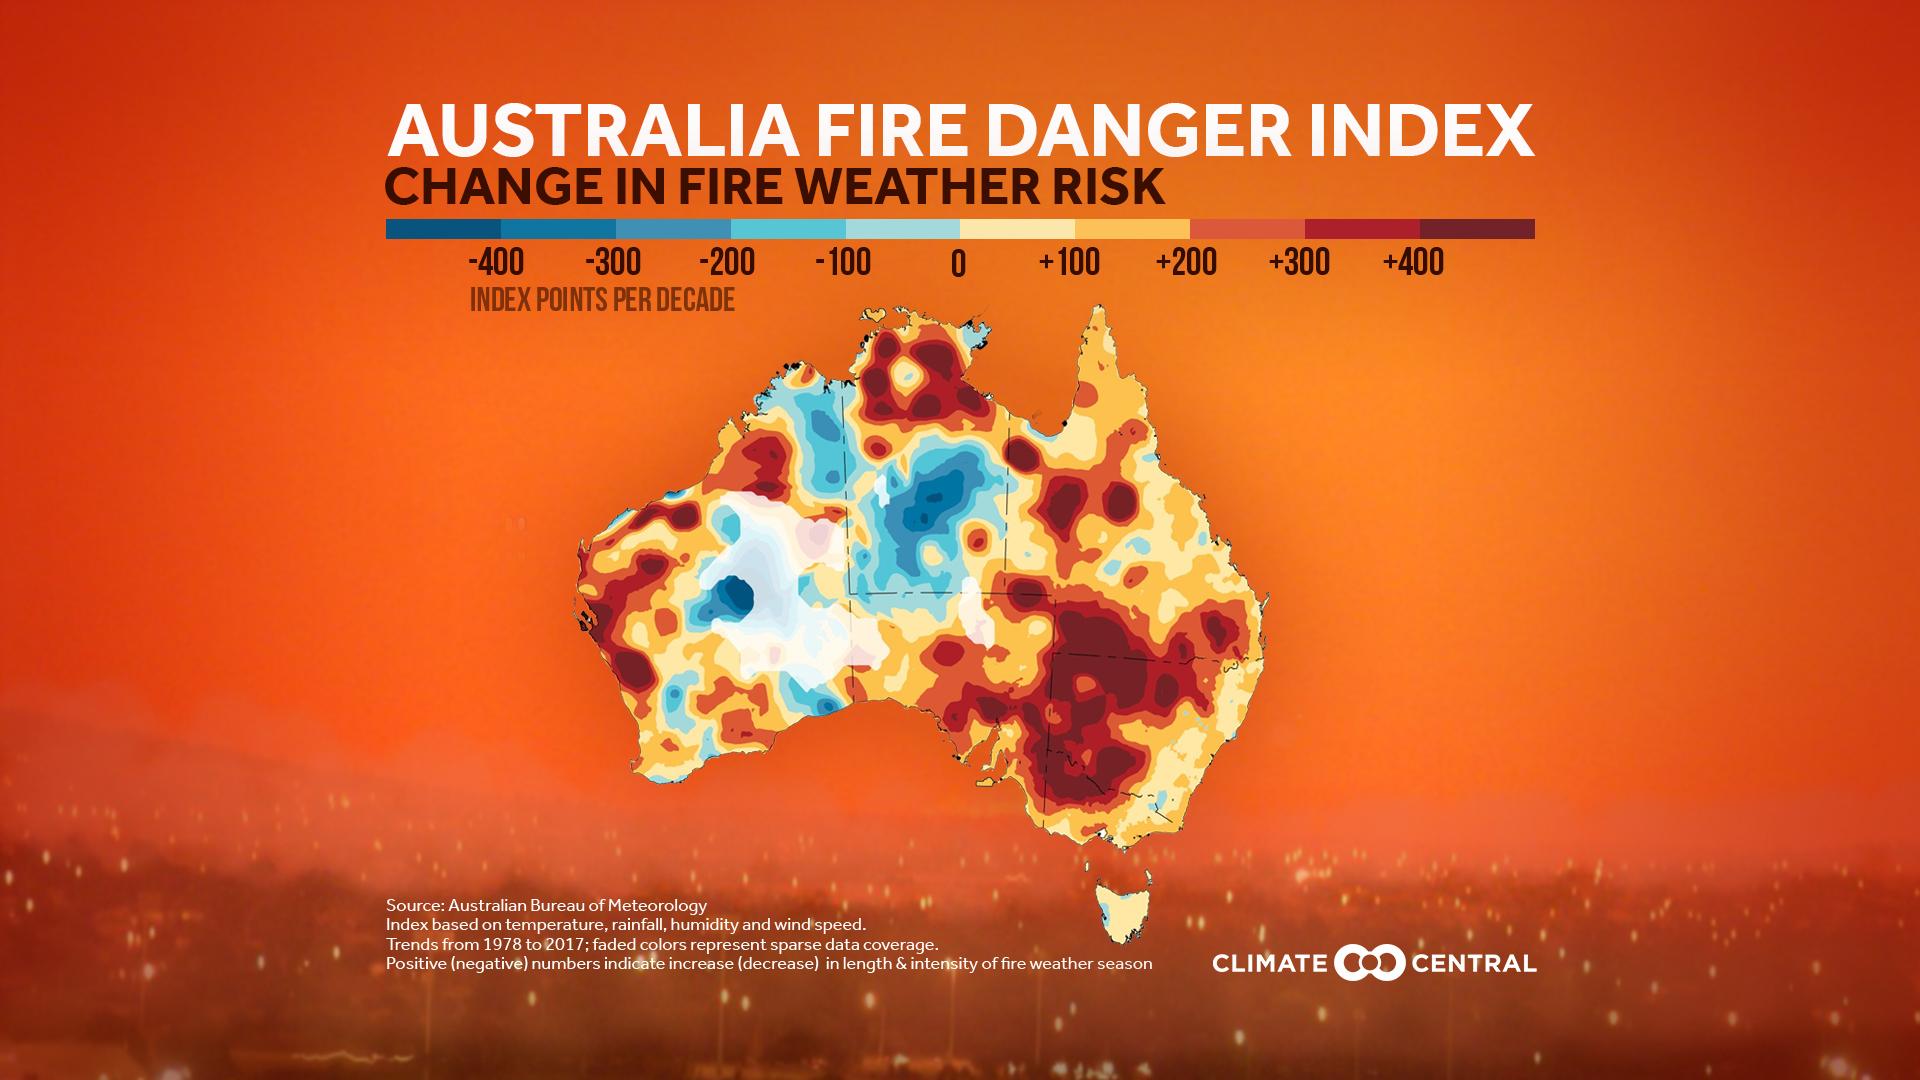 Australian Fires and Climate Change